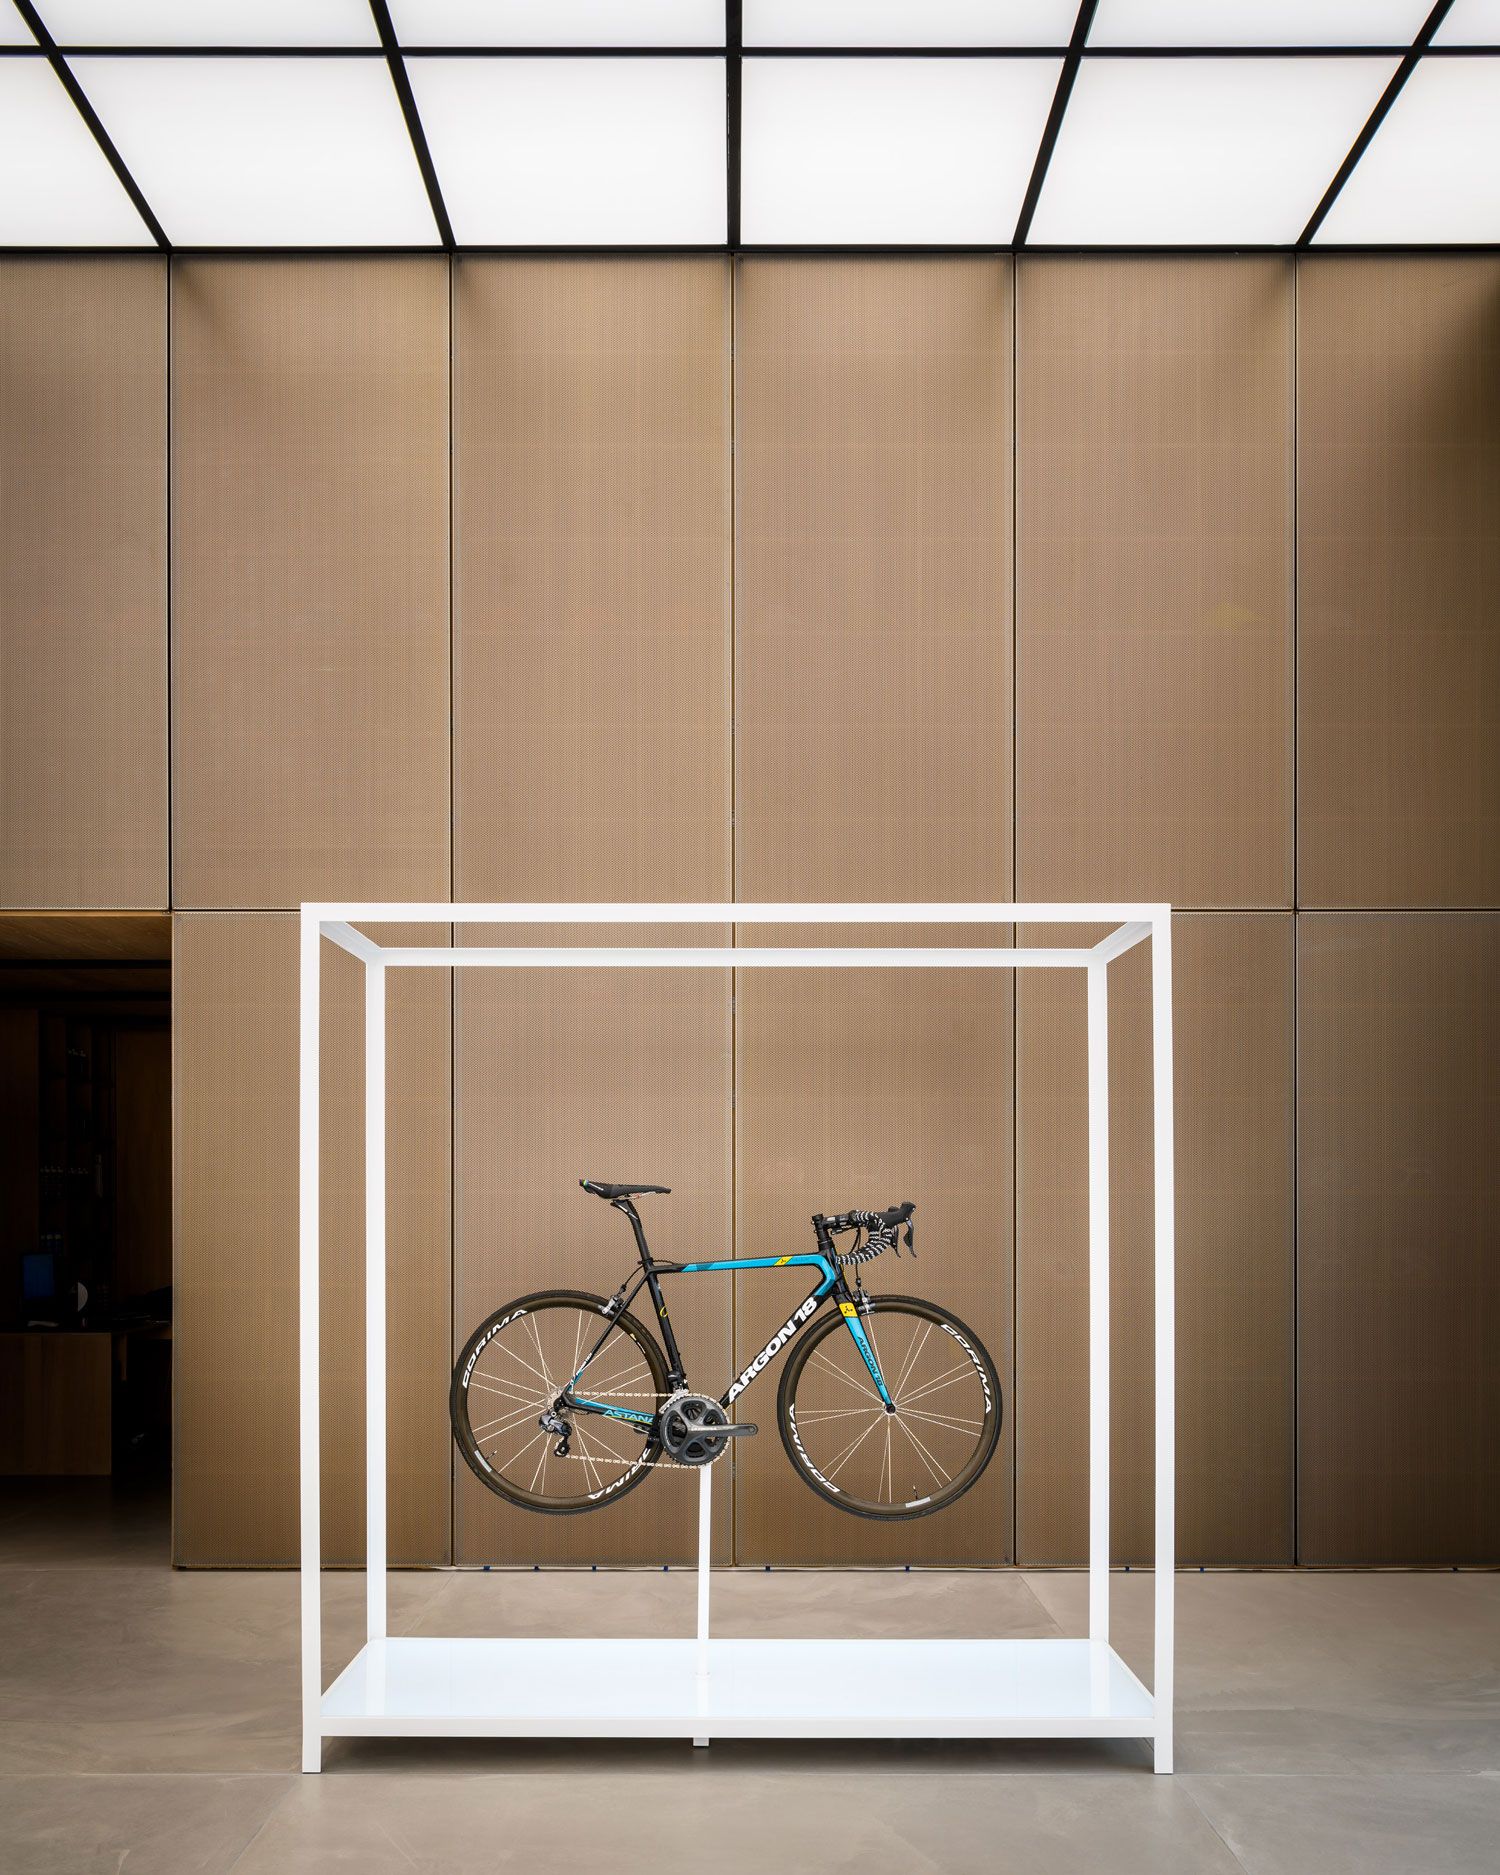 United Cycling Lab & Store In Denmarkjohannes Torpe | Yellowtrace Throughout Gridlines Metal Wall Art (View 8 of 15)